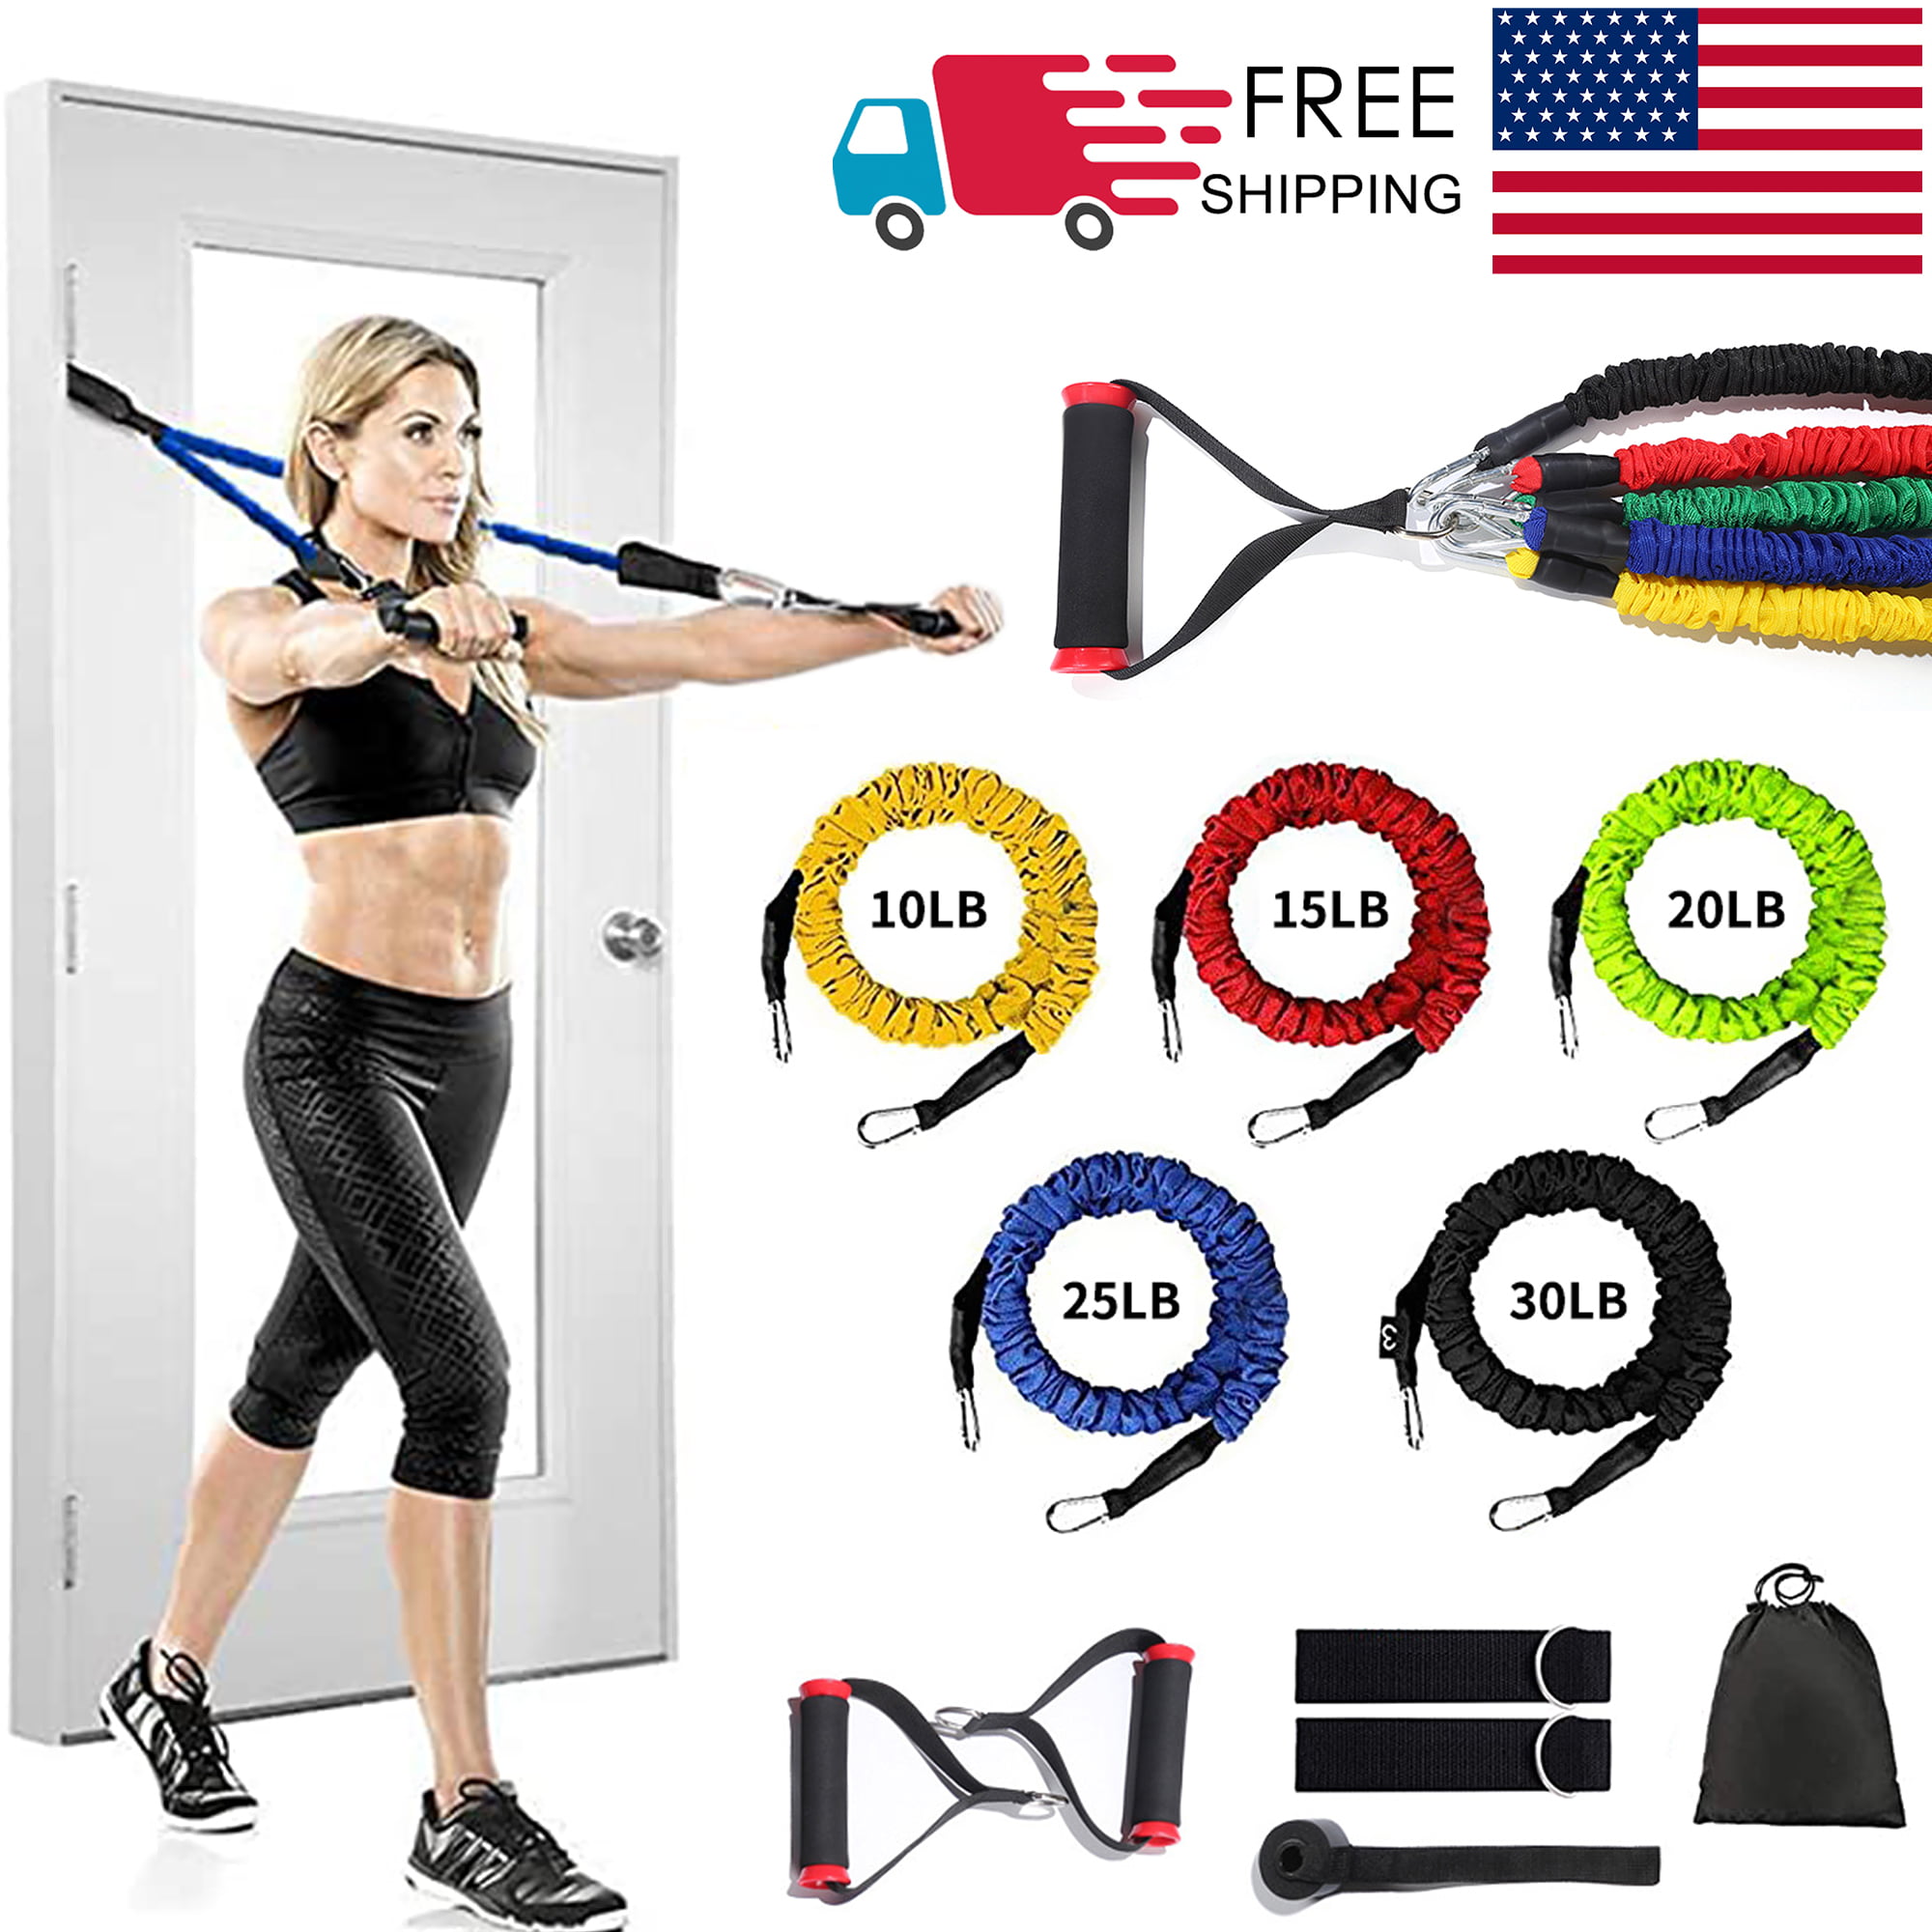 100Lbs Resistance Band Set Workout Exercise Crossfit Fitness Yoga Training Bands 